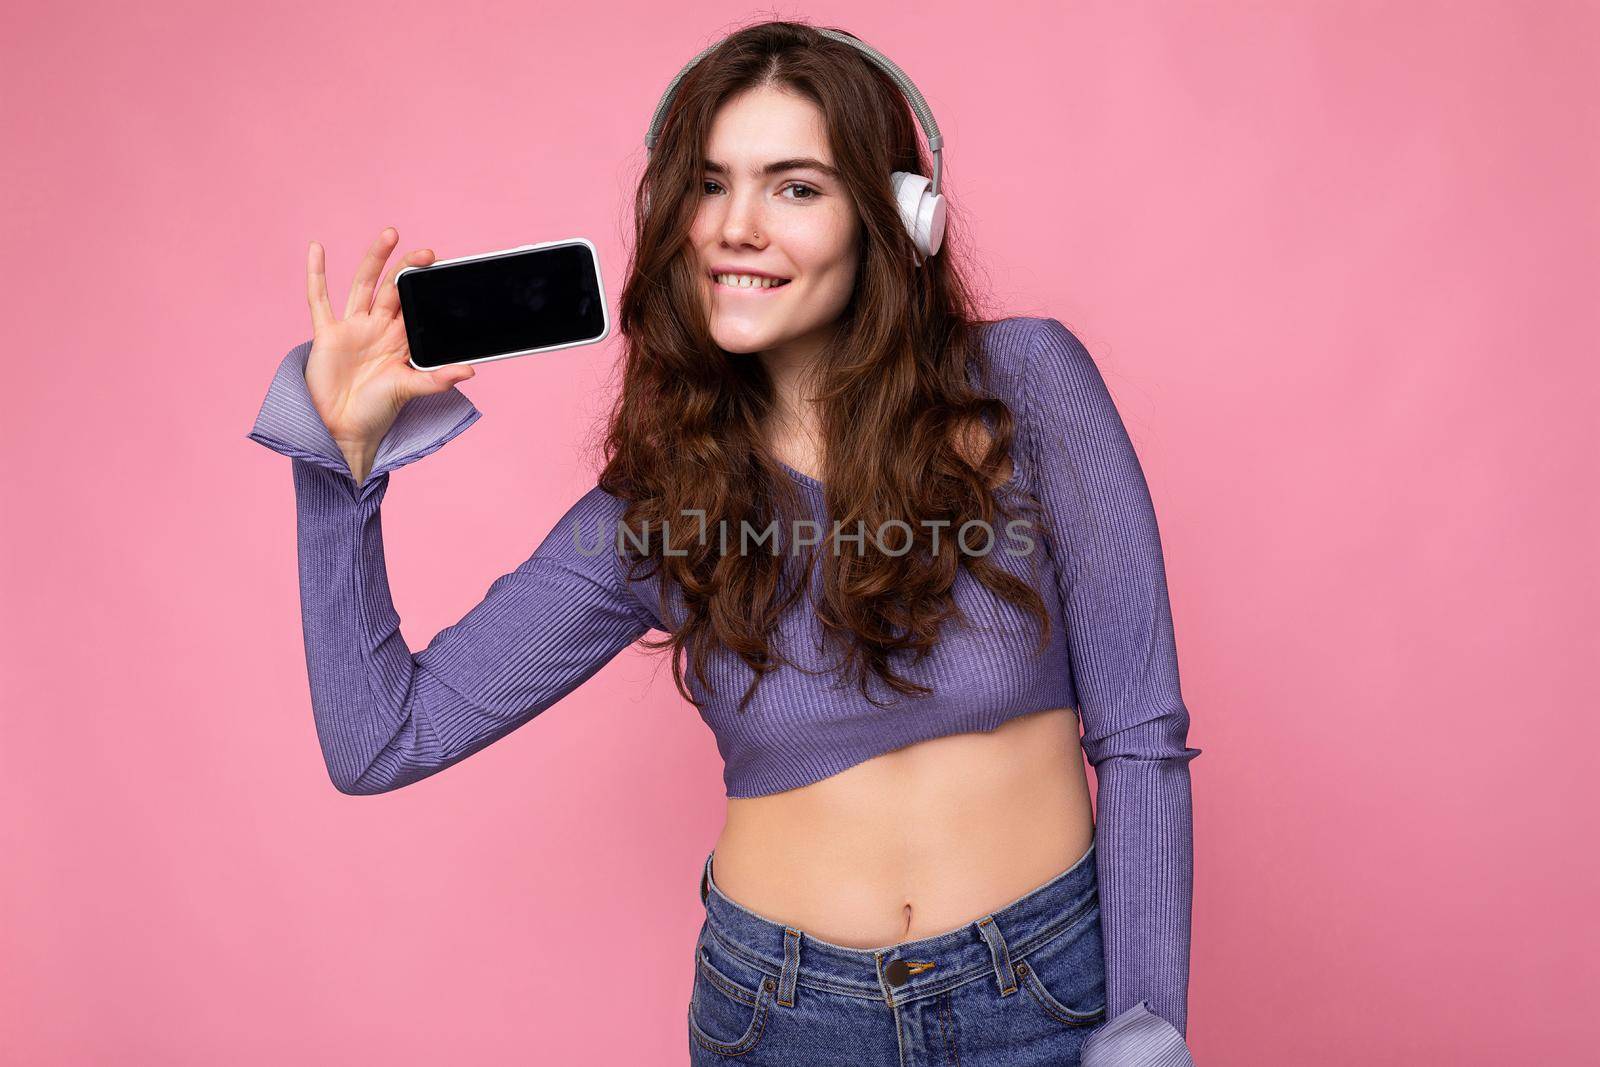 Beautiful happy smiling young woman wearing stylish casual outfit isolated on background wall holding and showing mobile phone with empty display for mockup wearing white bluetooth headphones listening to music and having fun looking at camera.